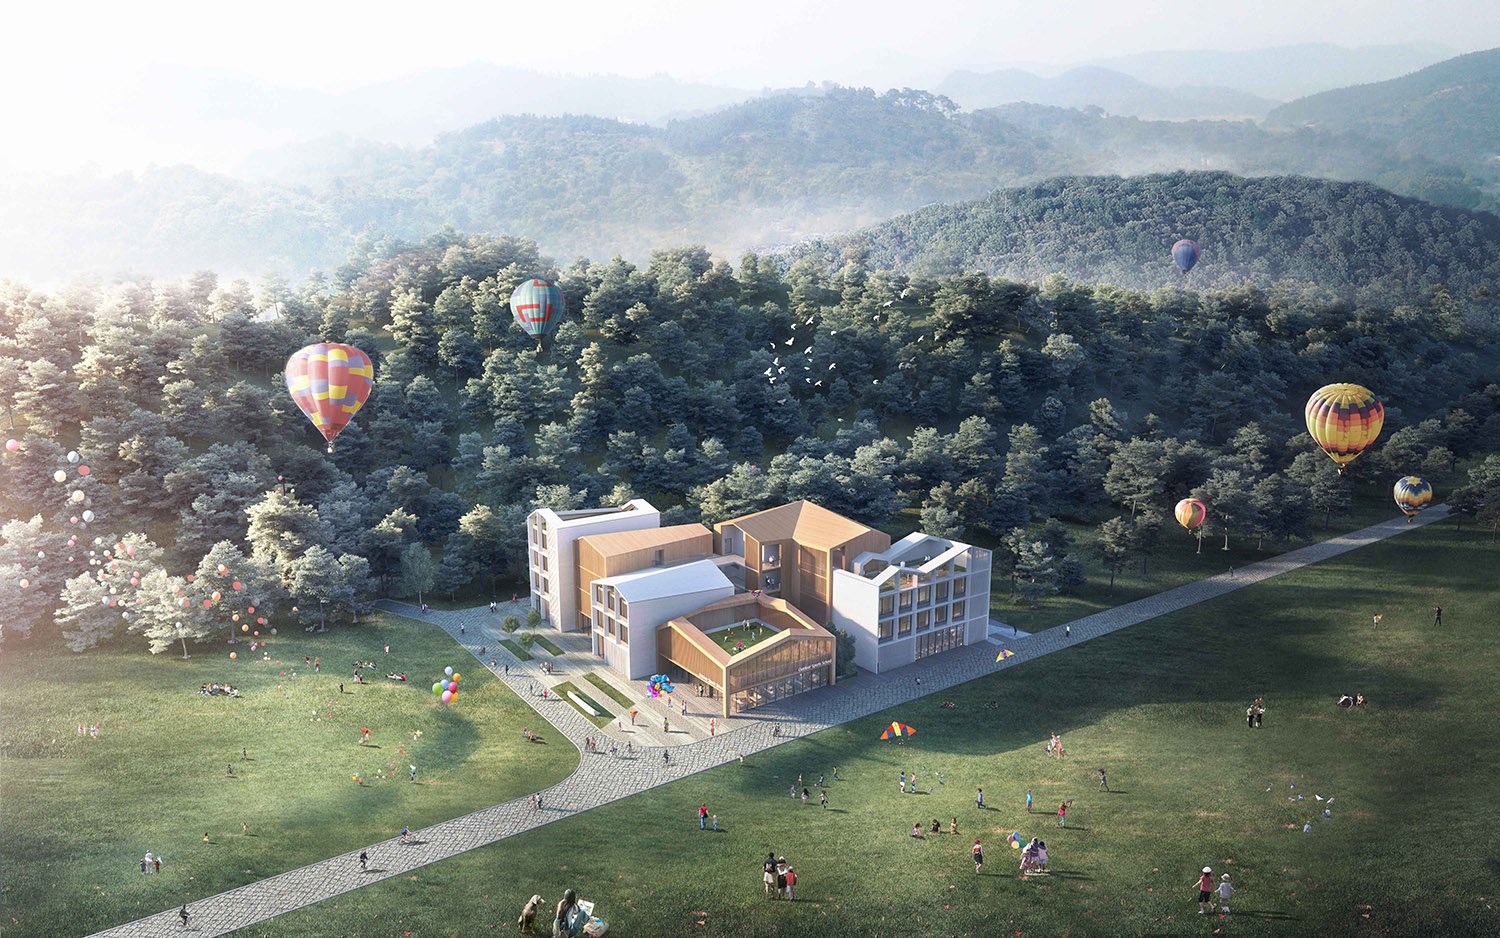 Lin’an “Valley of the Wind” School: like a paper plane carrying students' dreams